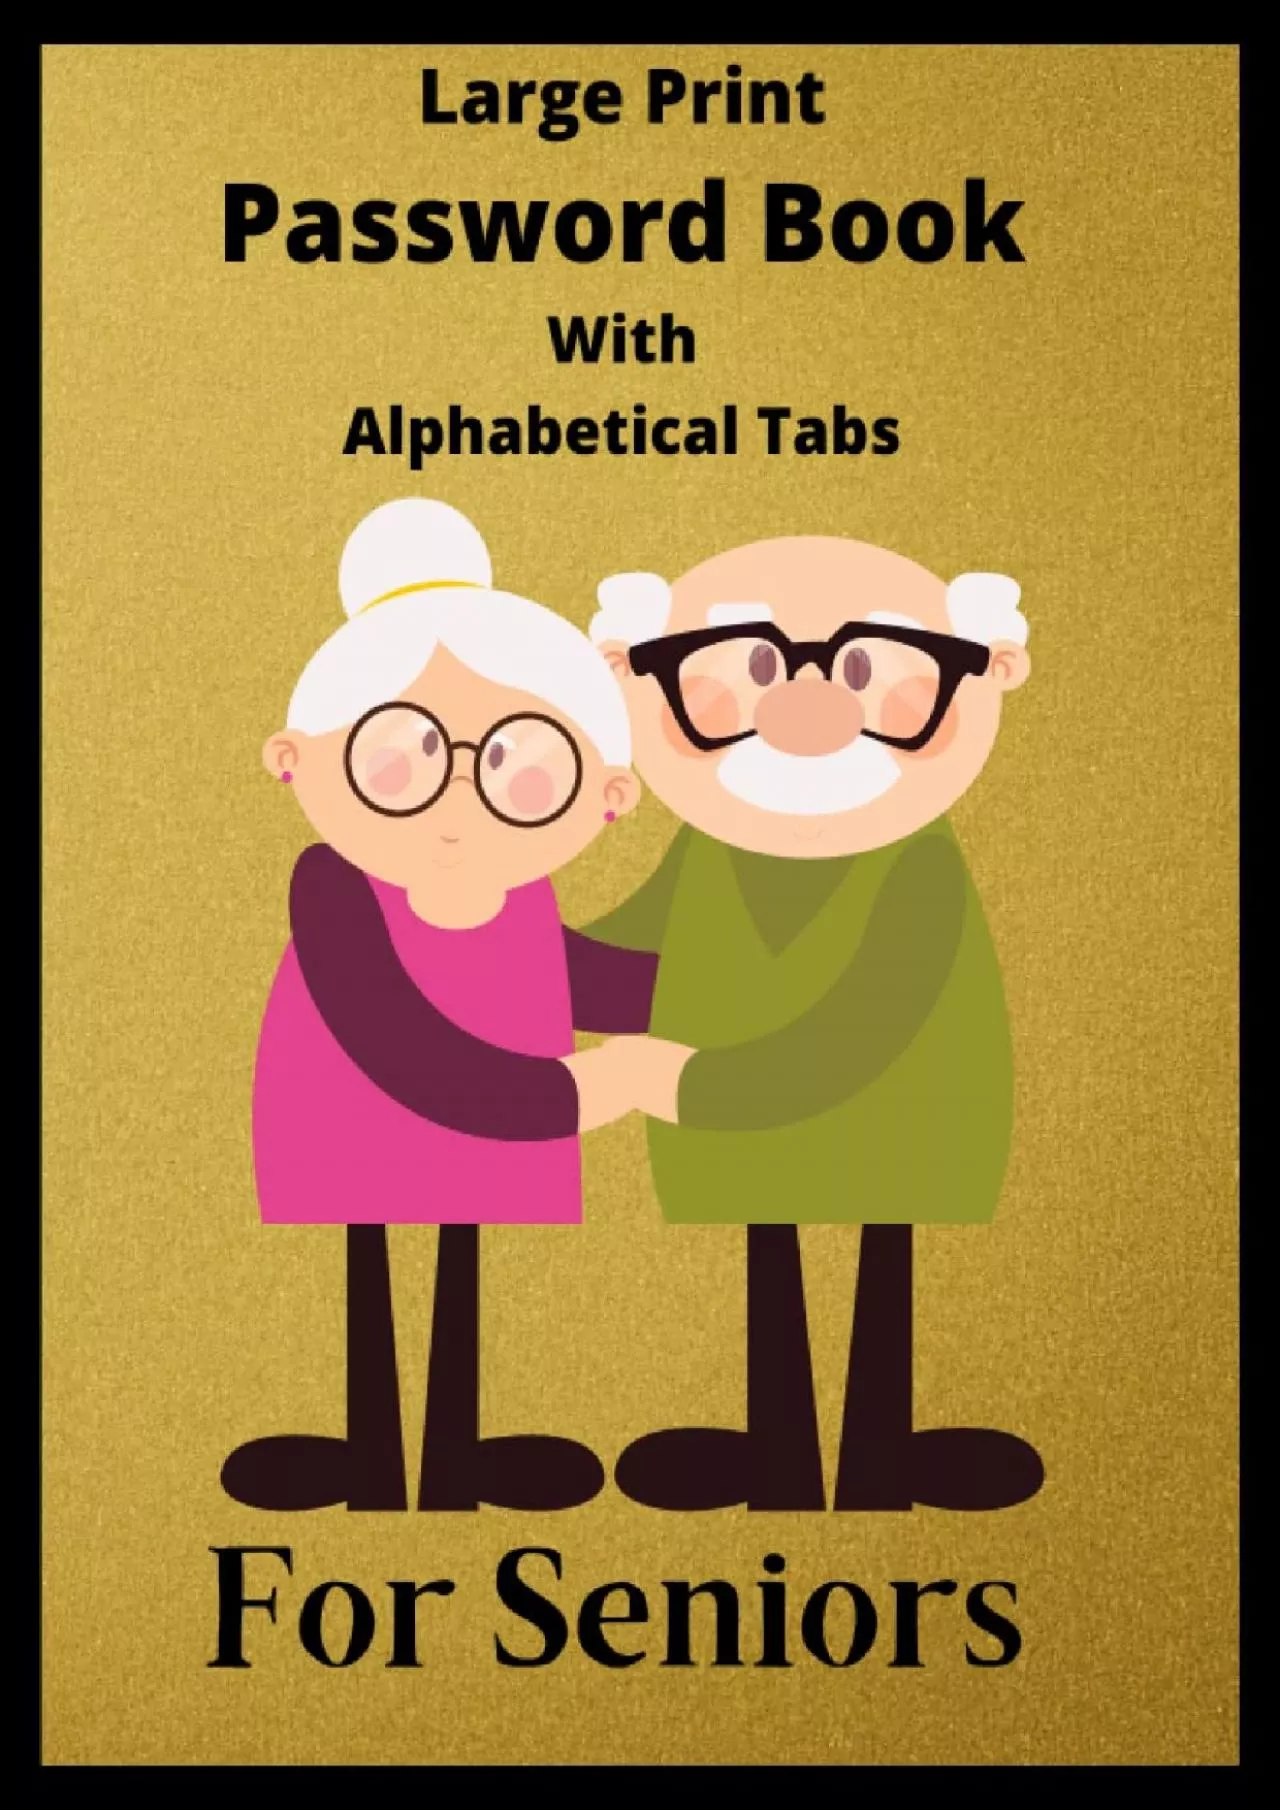 [READ]-Large Print Password Book With Alphabetical Tabs For Seniors: Password Log Book